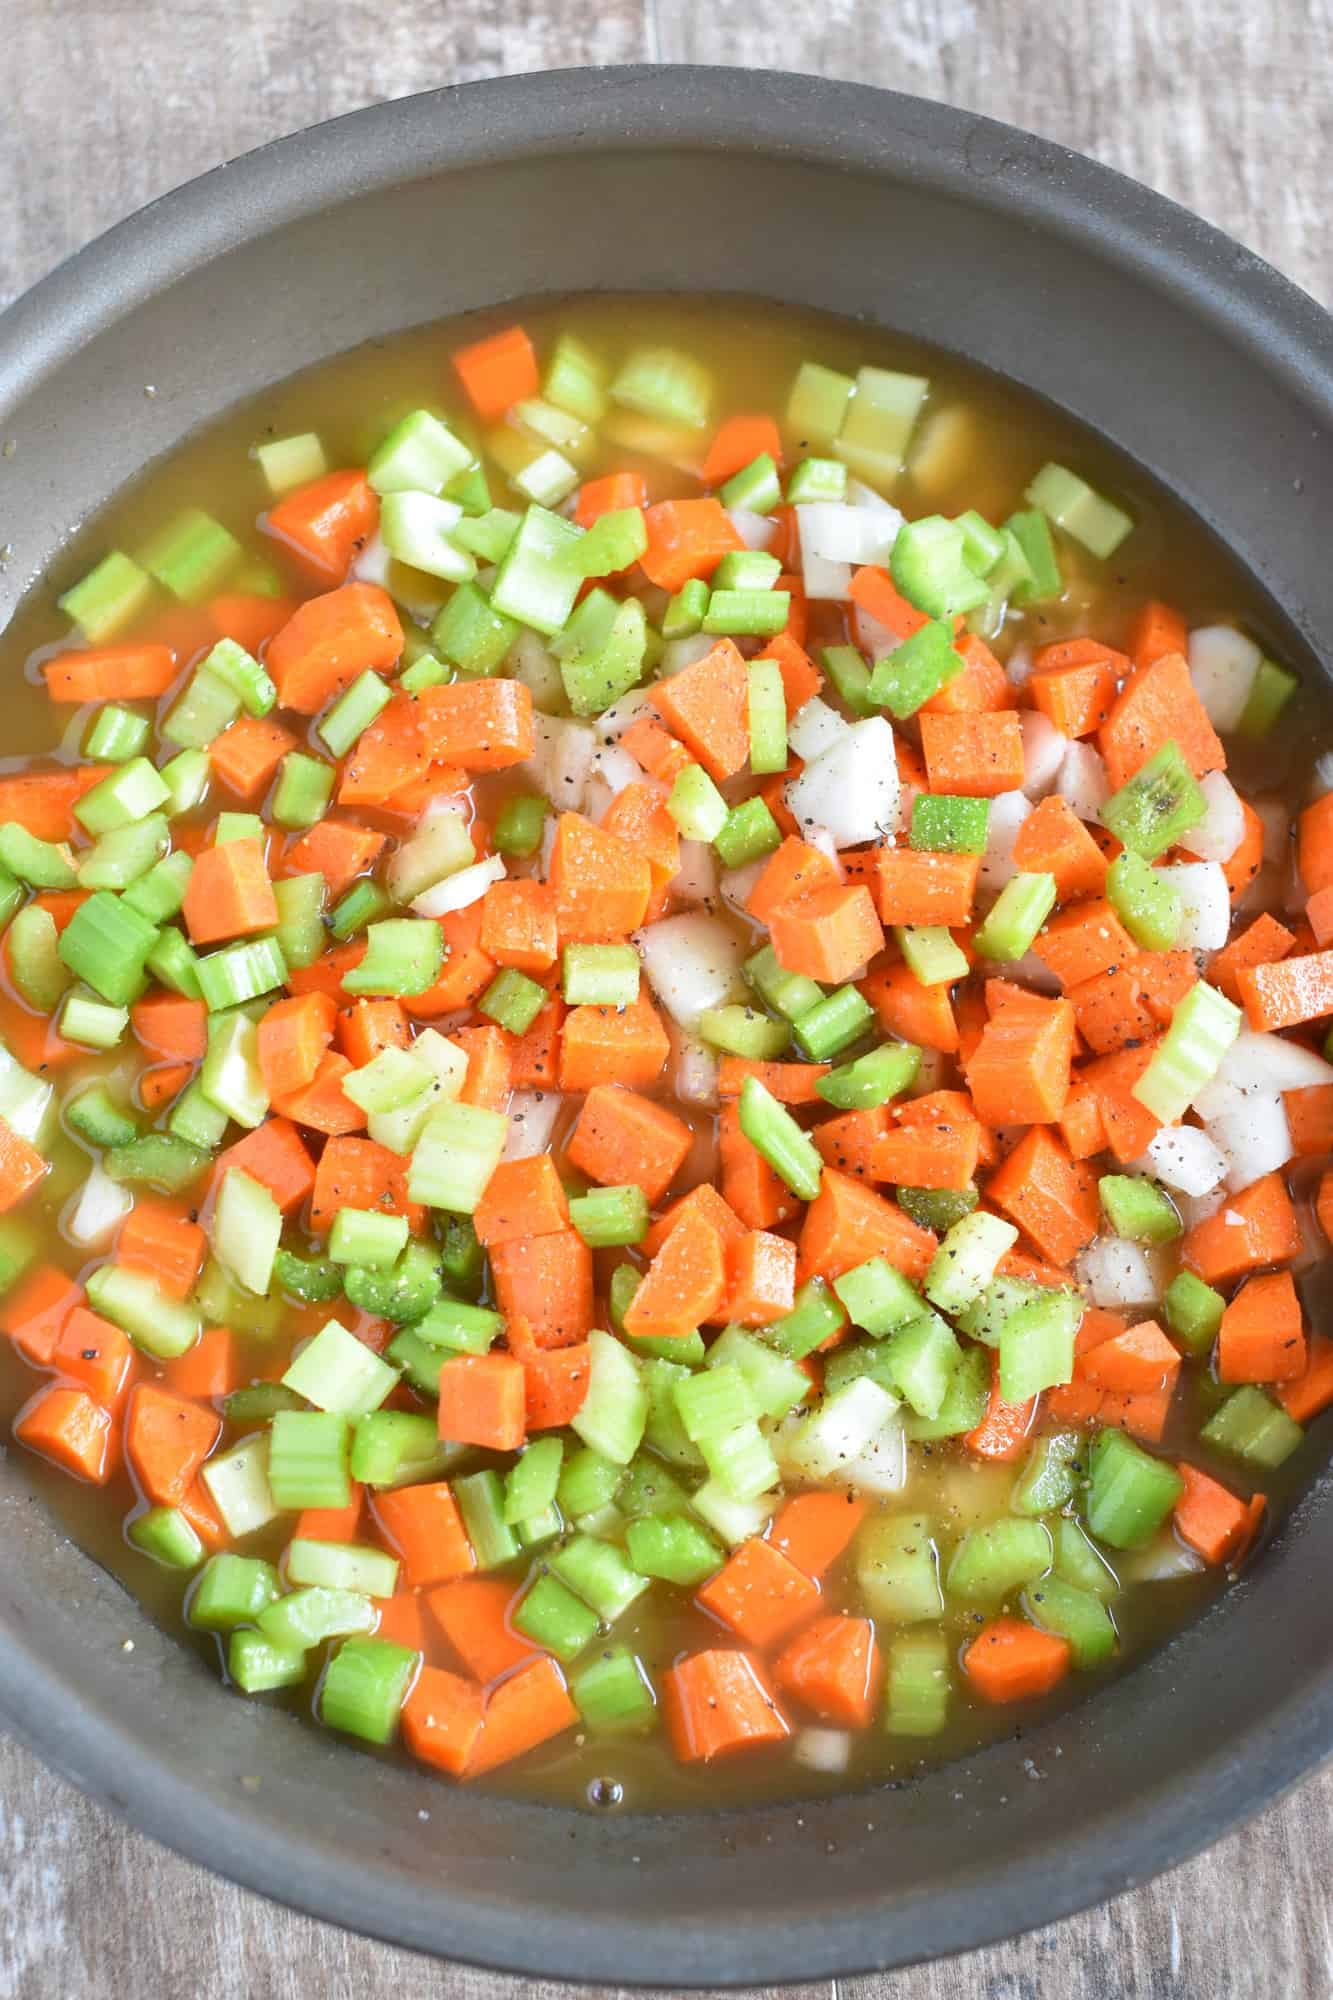 carrots, celery and onion in skillet with vegetable broth.